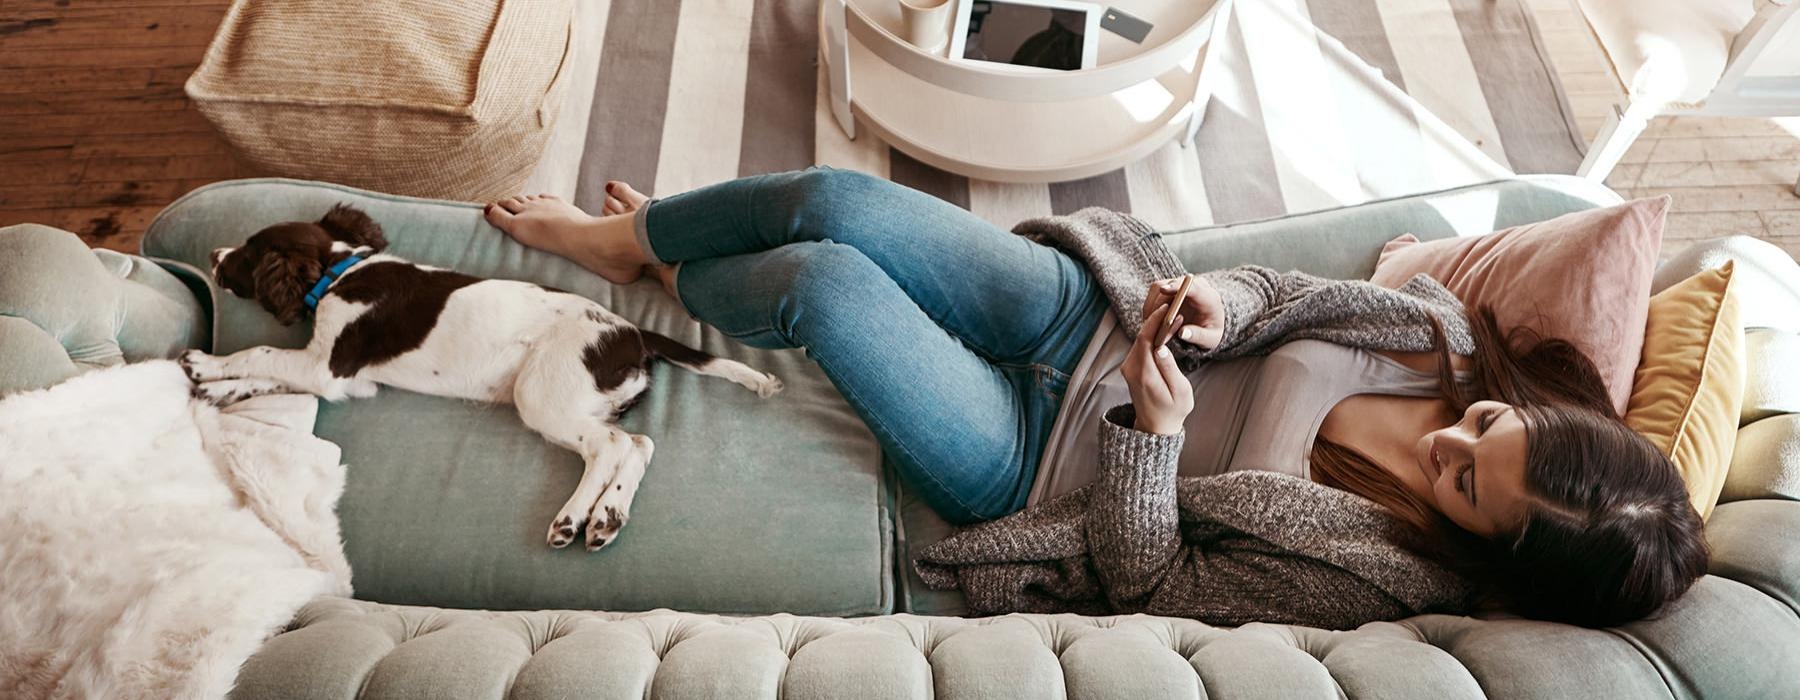 woman lies on a couch texting next to her dog